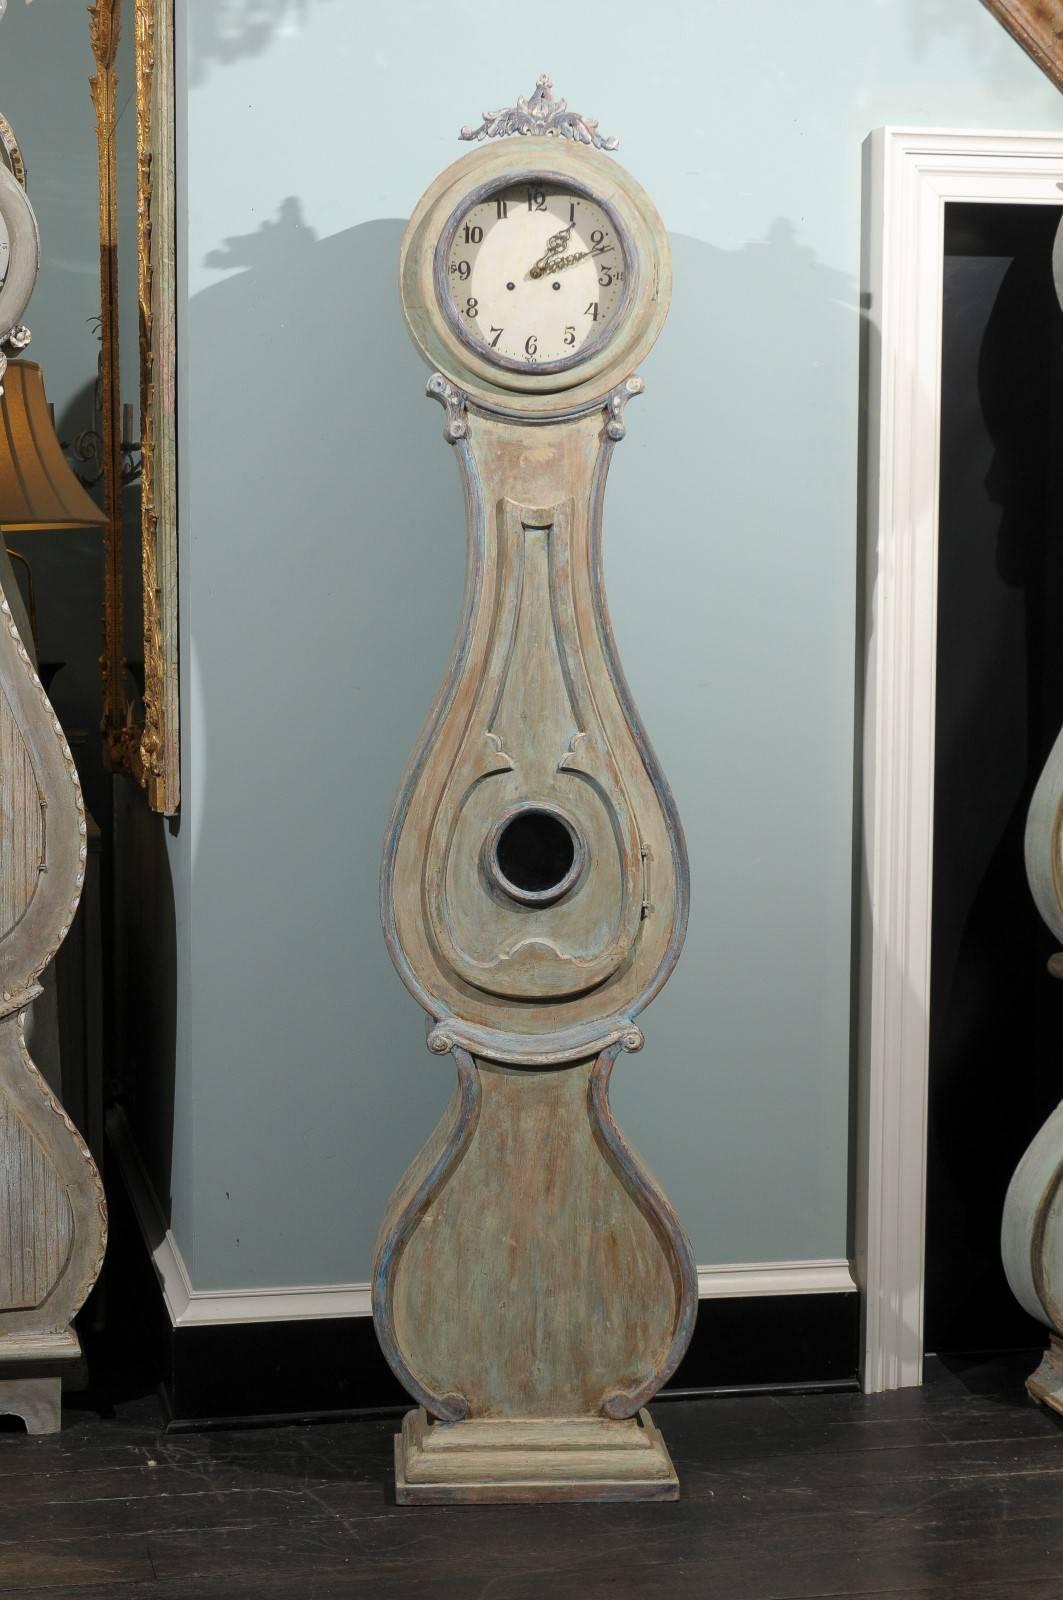 A 19th century Swedish painted wood Fryksdahl clock. This clock features a nice hue of green with aqua, blue and purple accents with some wood coming through. This Fryksdahl's focal point is its carved crest depicting some foliage. The neck and